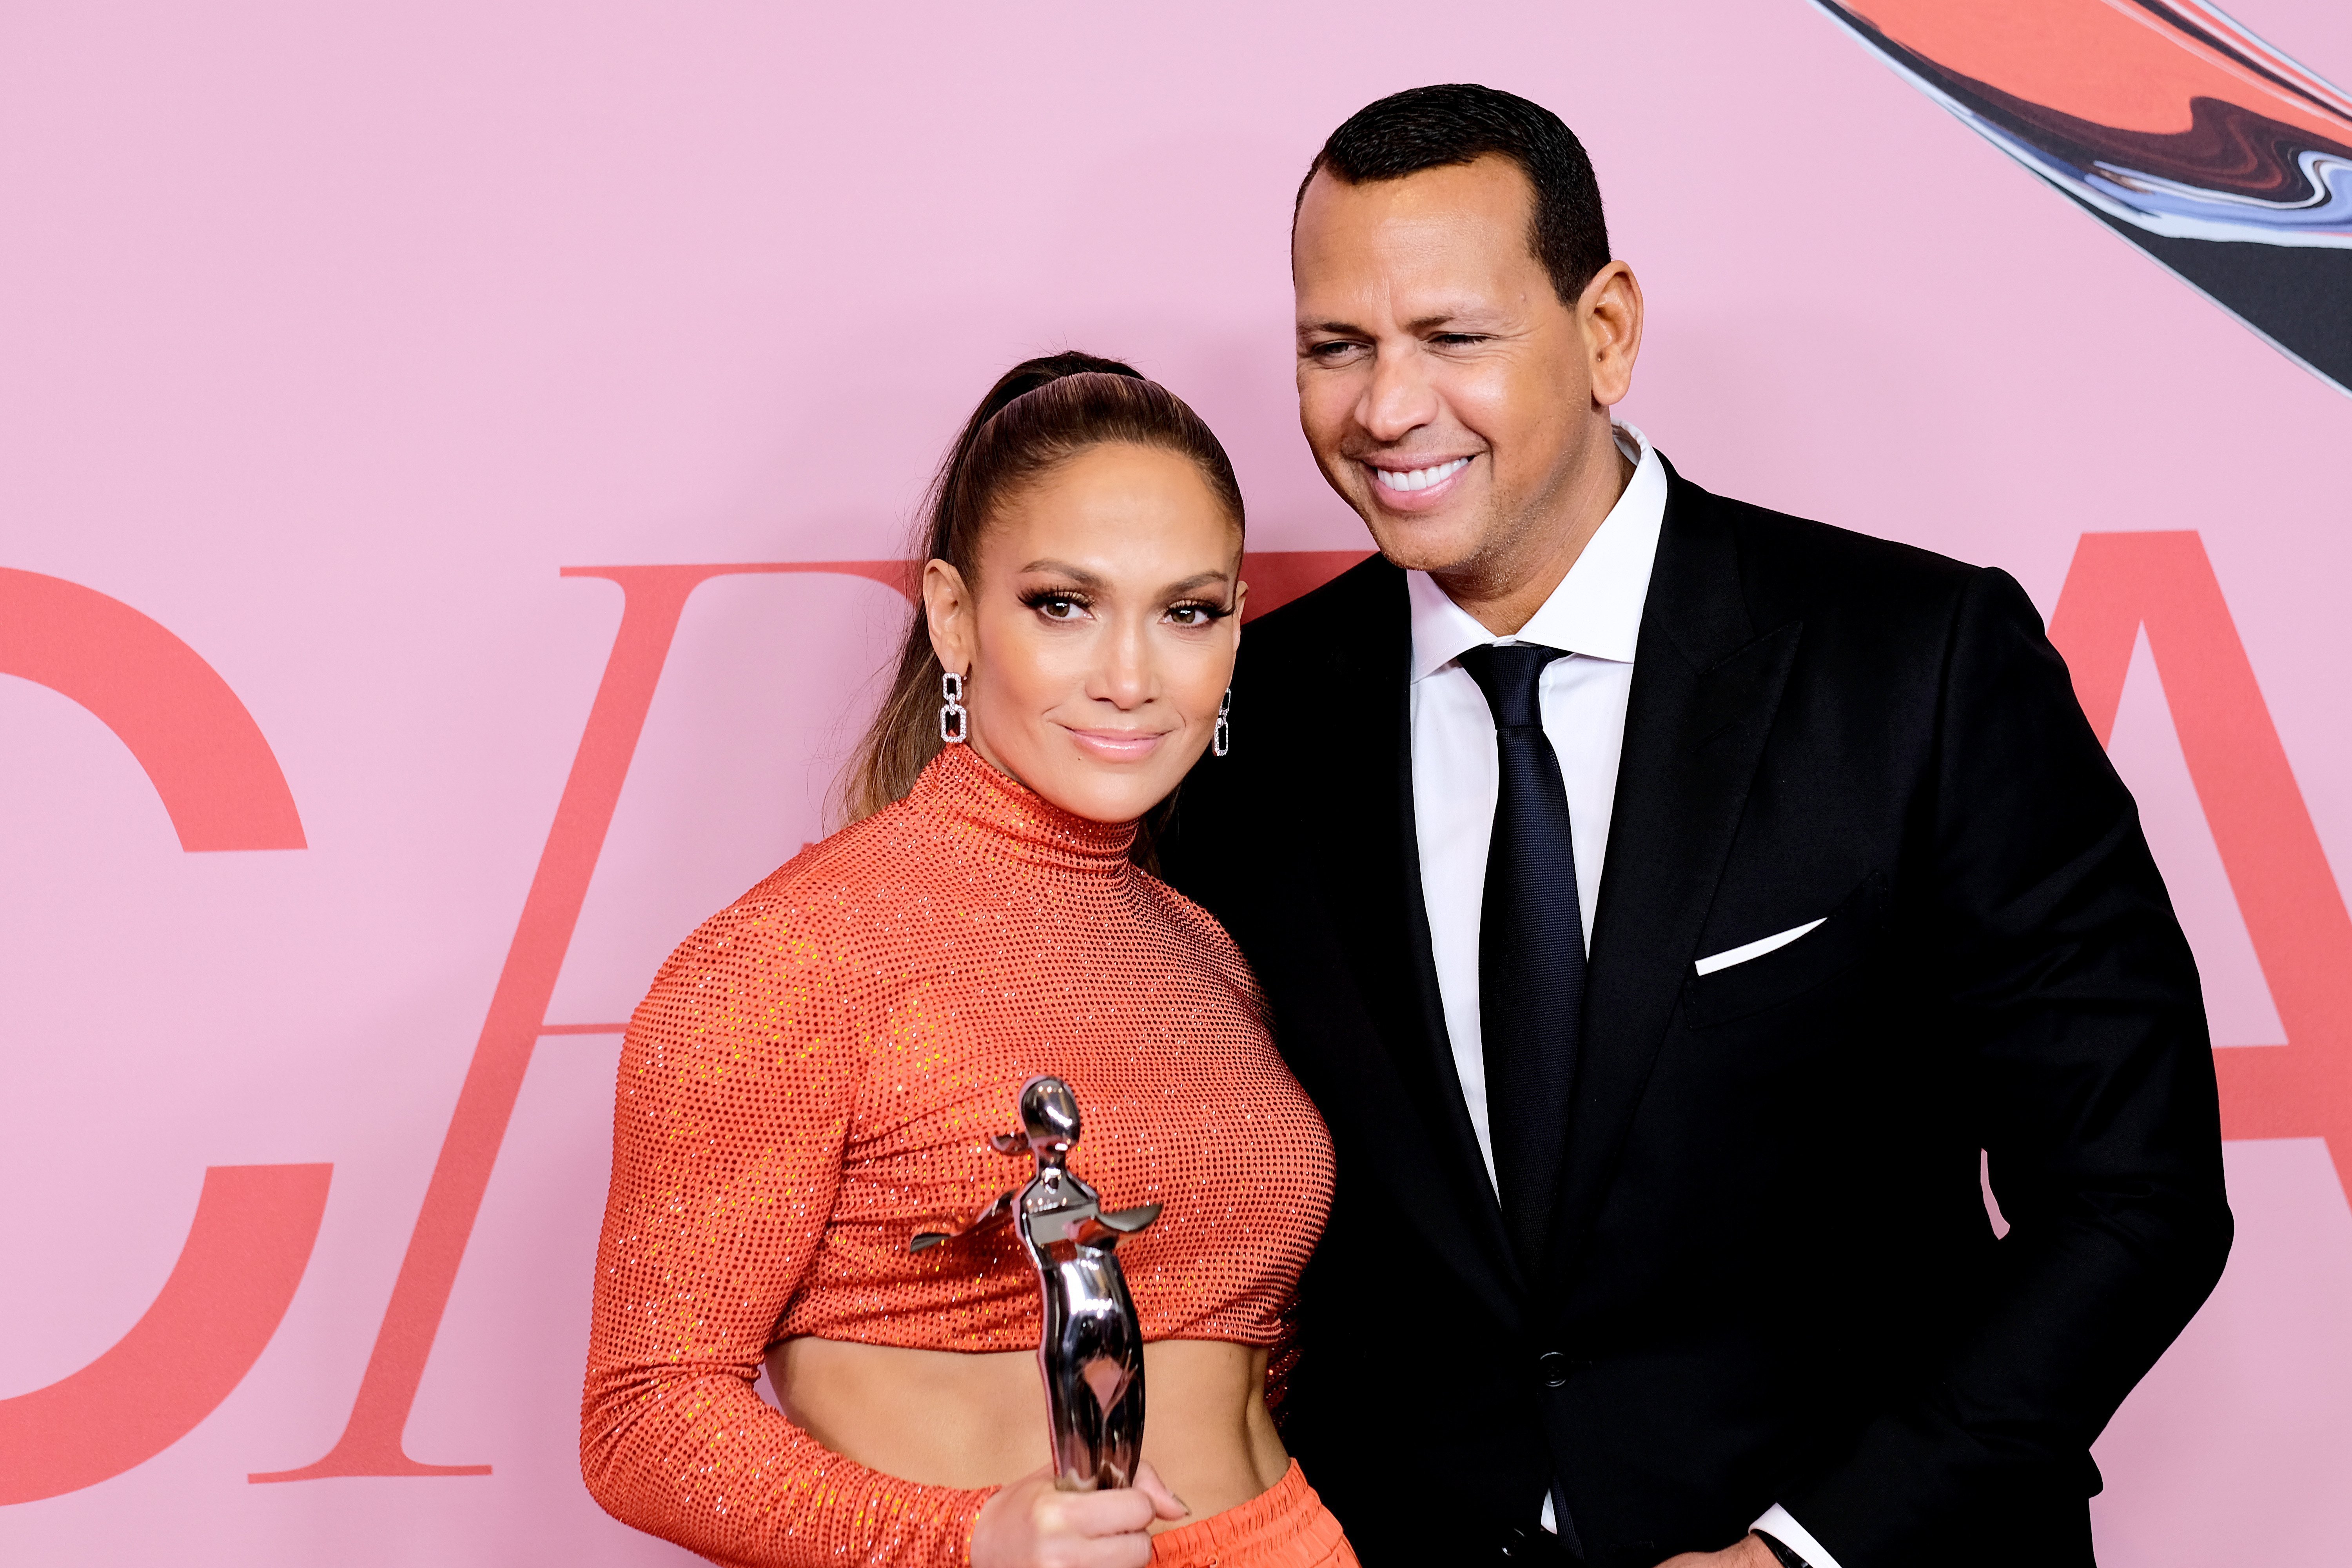 Jennifer Lopez and Alex Rodriguez attend the Fashion Icon Awards in June 2019. | Photo: Getty Images